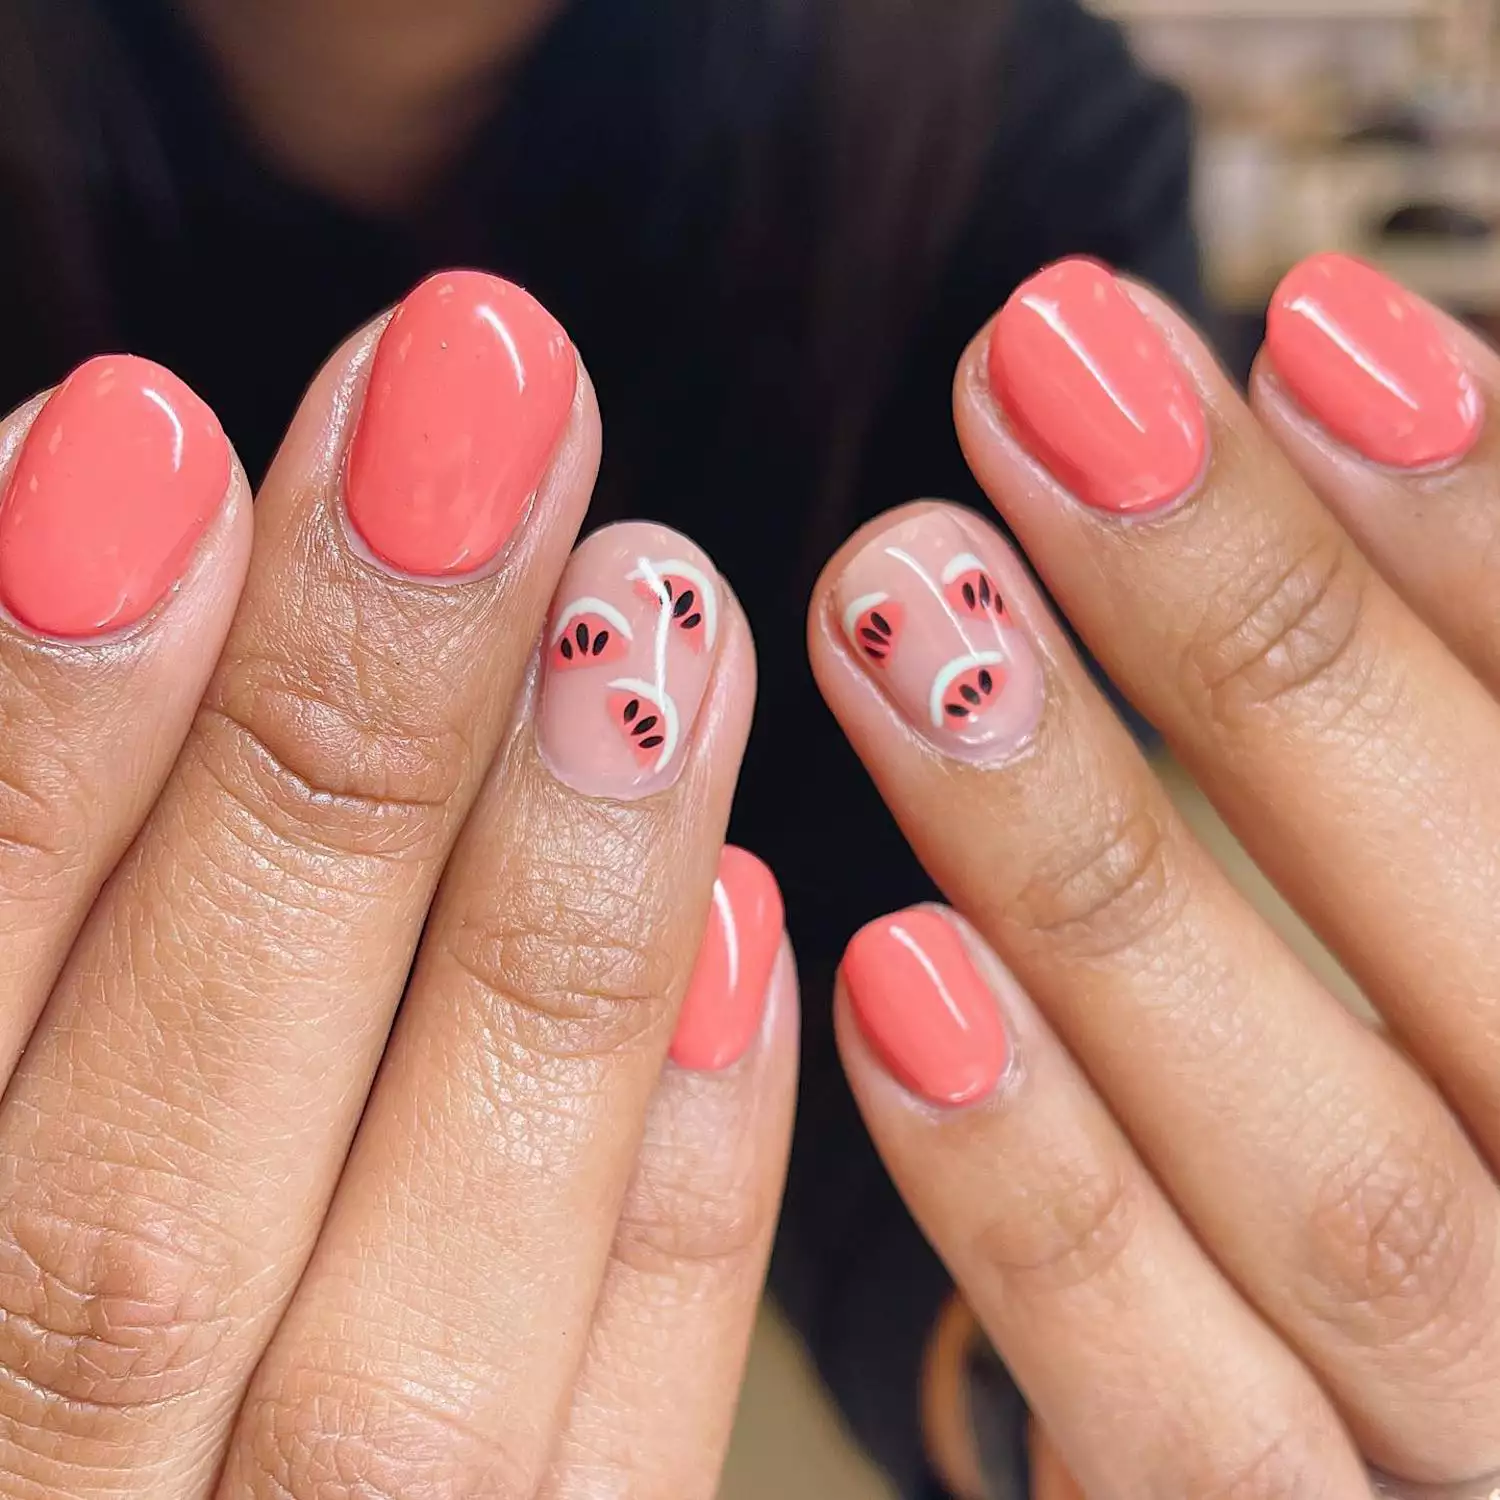 Peach-colored manicure with accent watermelon nails with white rind detail